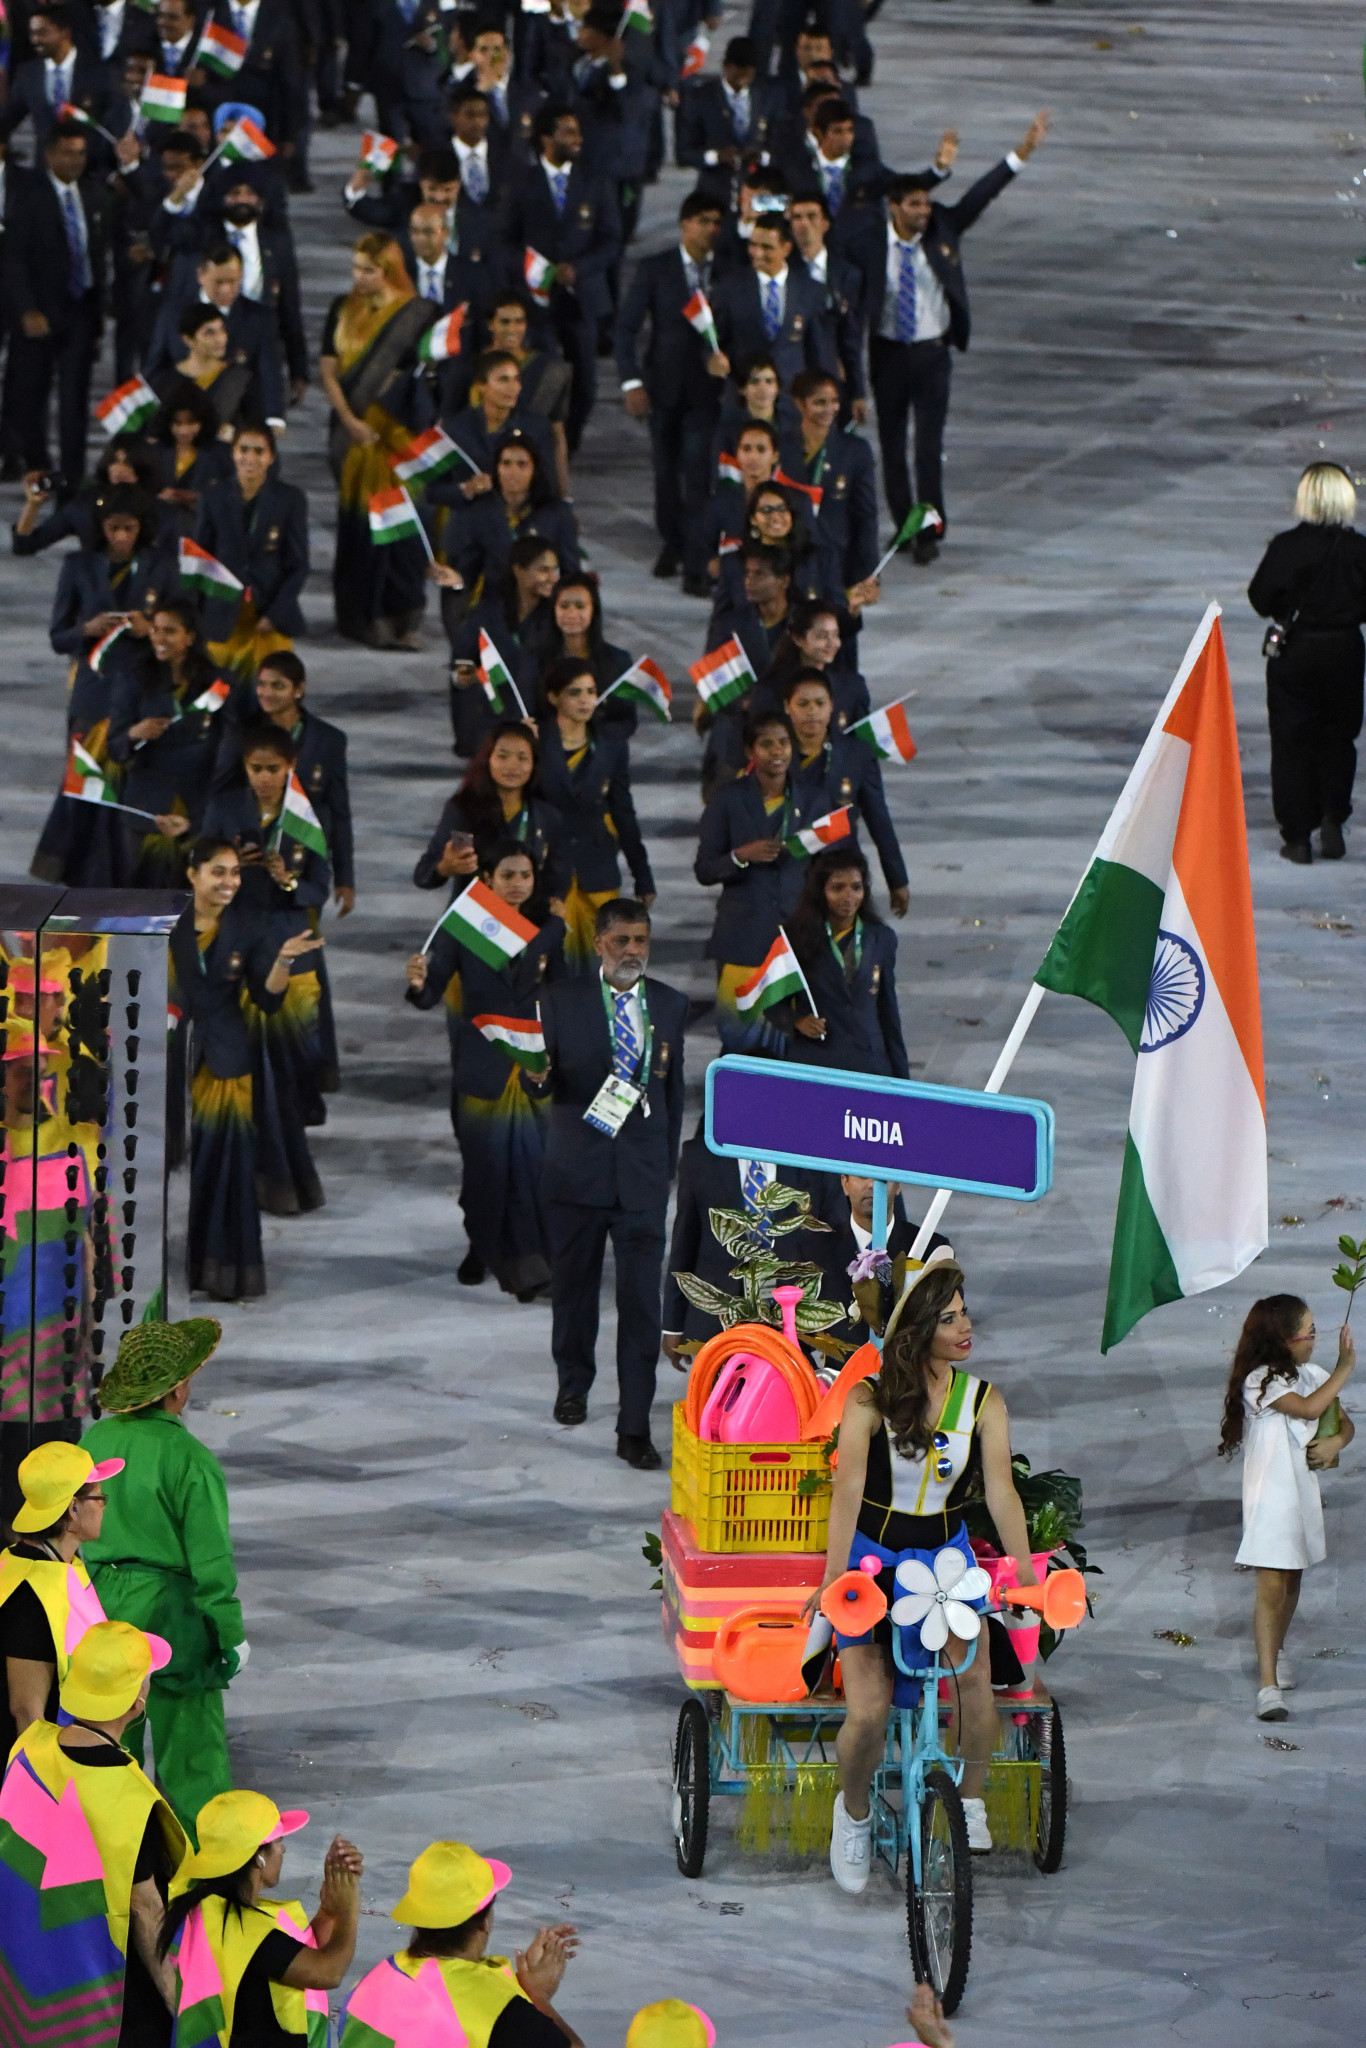 India won just two medals at the Rio 2016 Olympic Games ©Getty Images